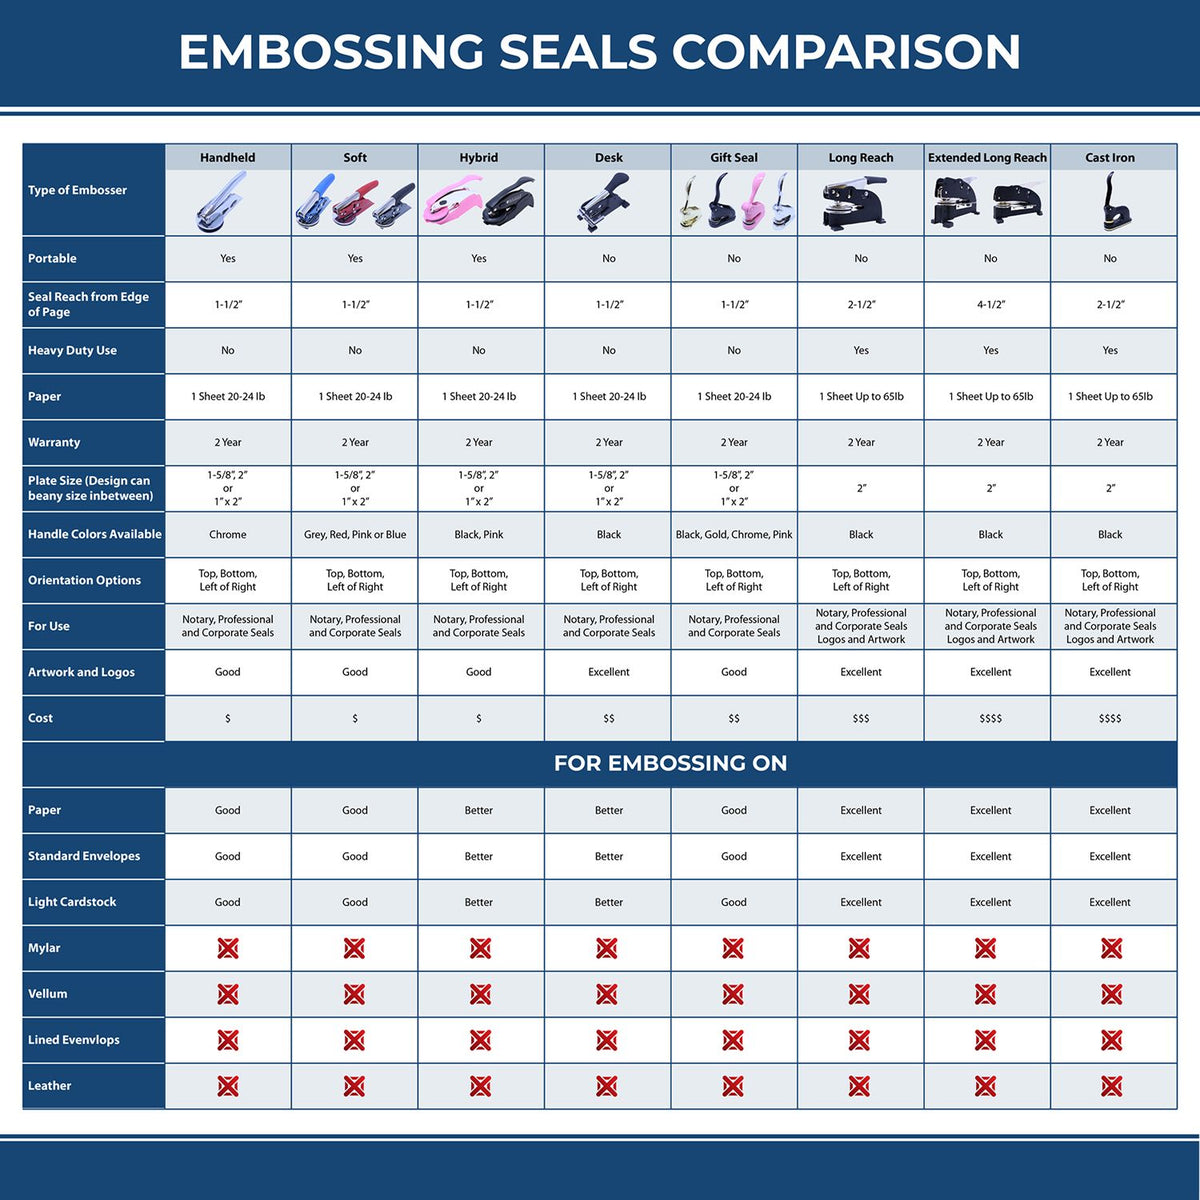 A comparison chart for the different types of mount models available for the Soft Louisiana Professional Engineer Seal.